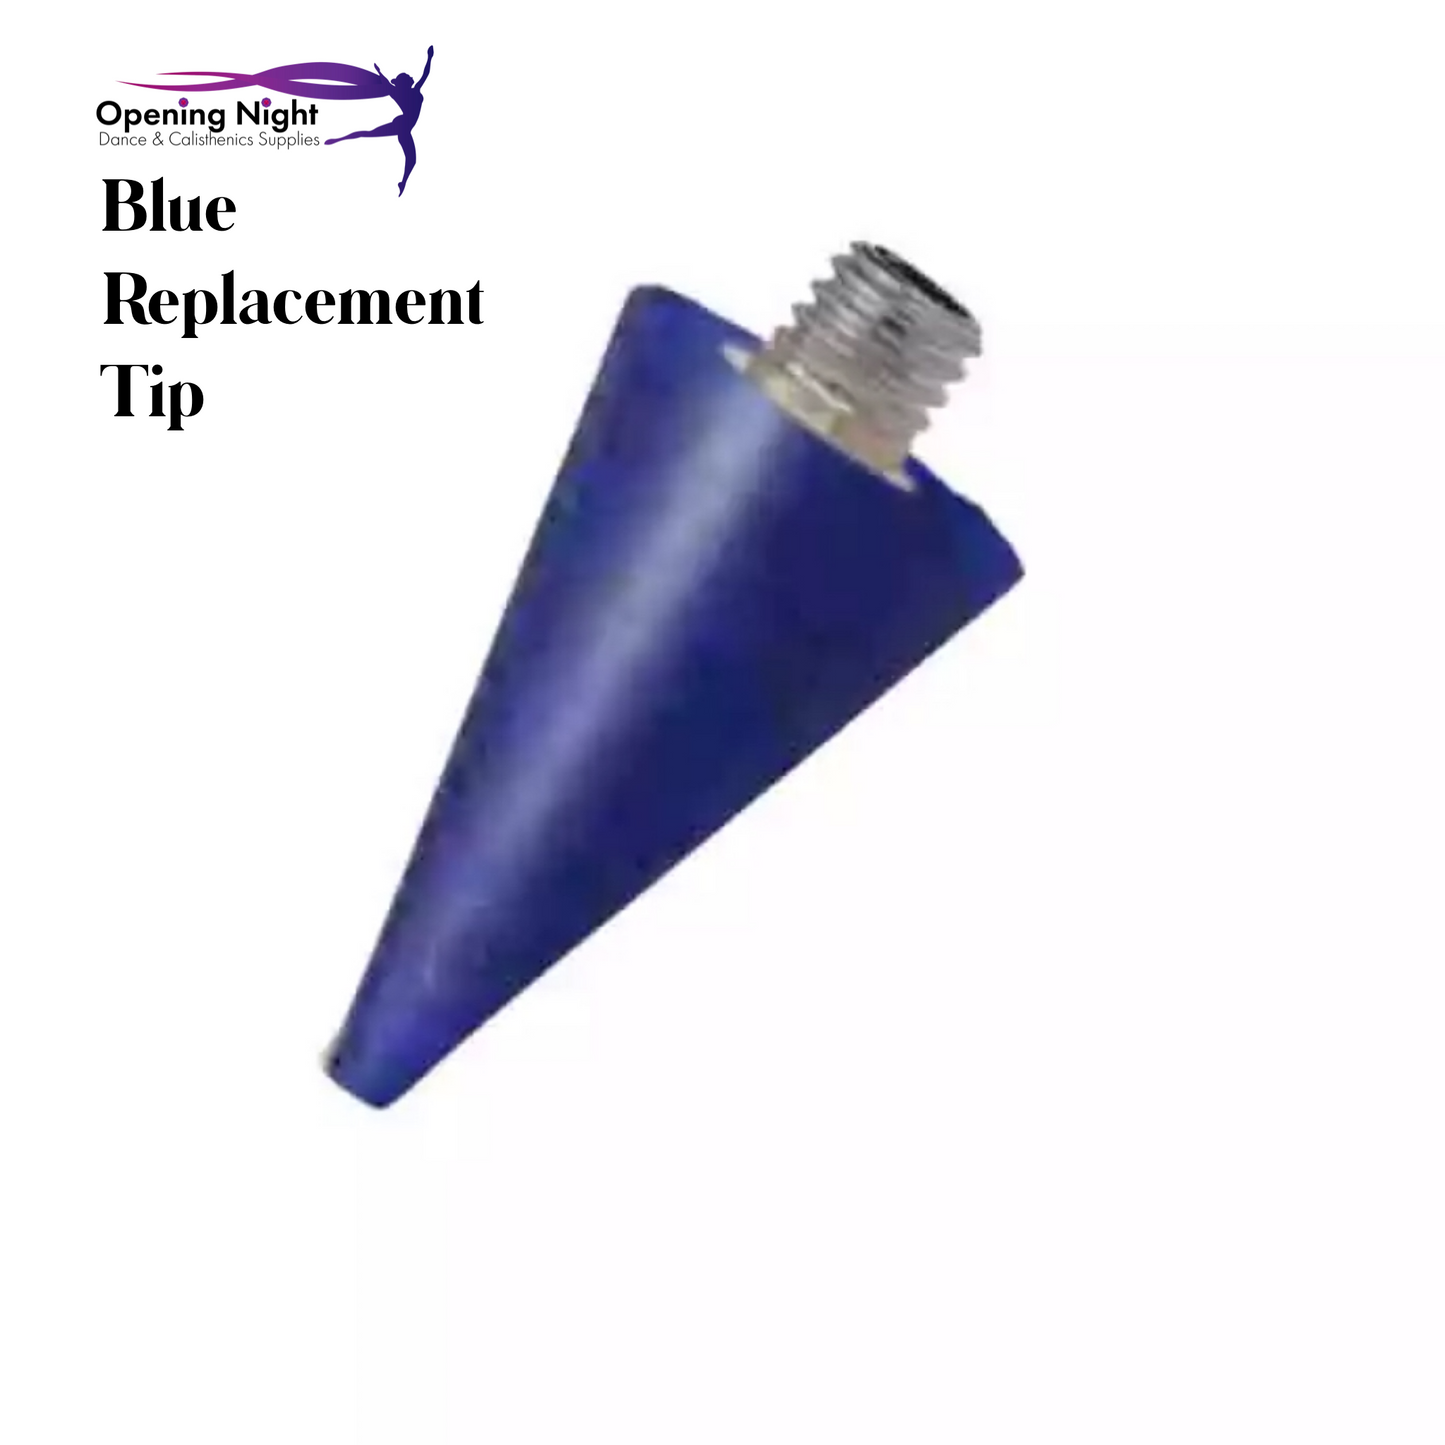 Crystal Applicator Wand - Replacement Tips